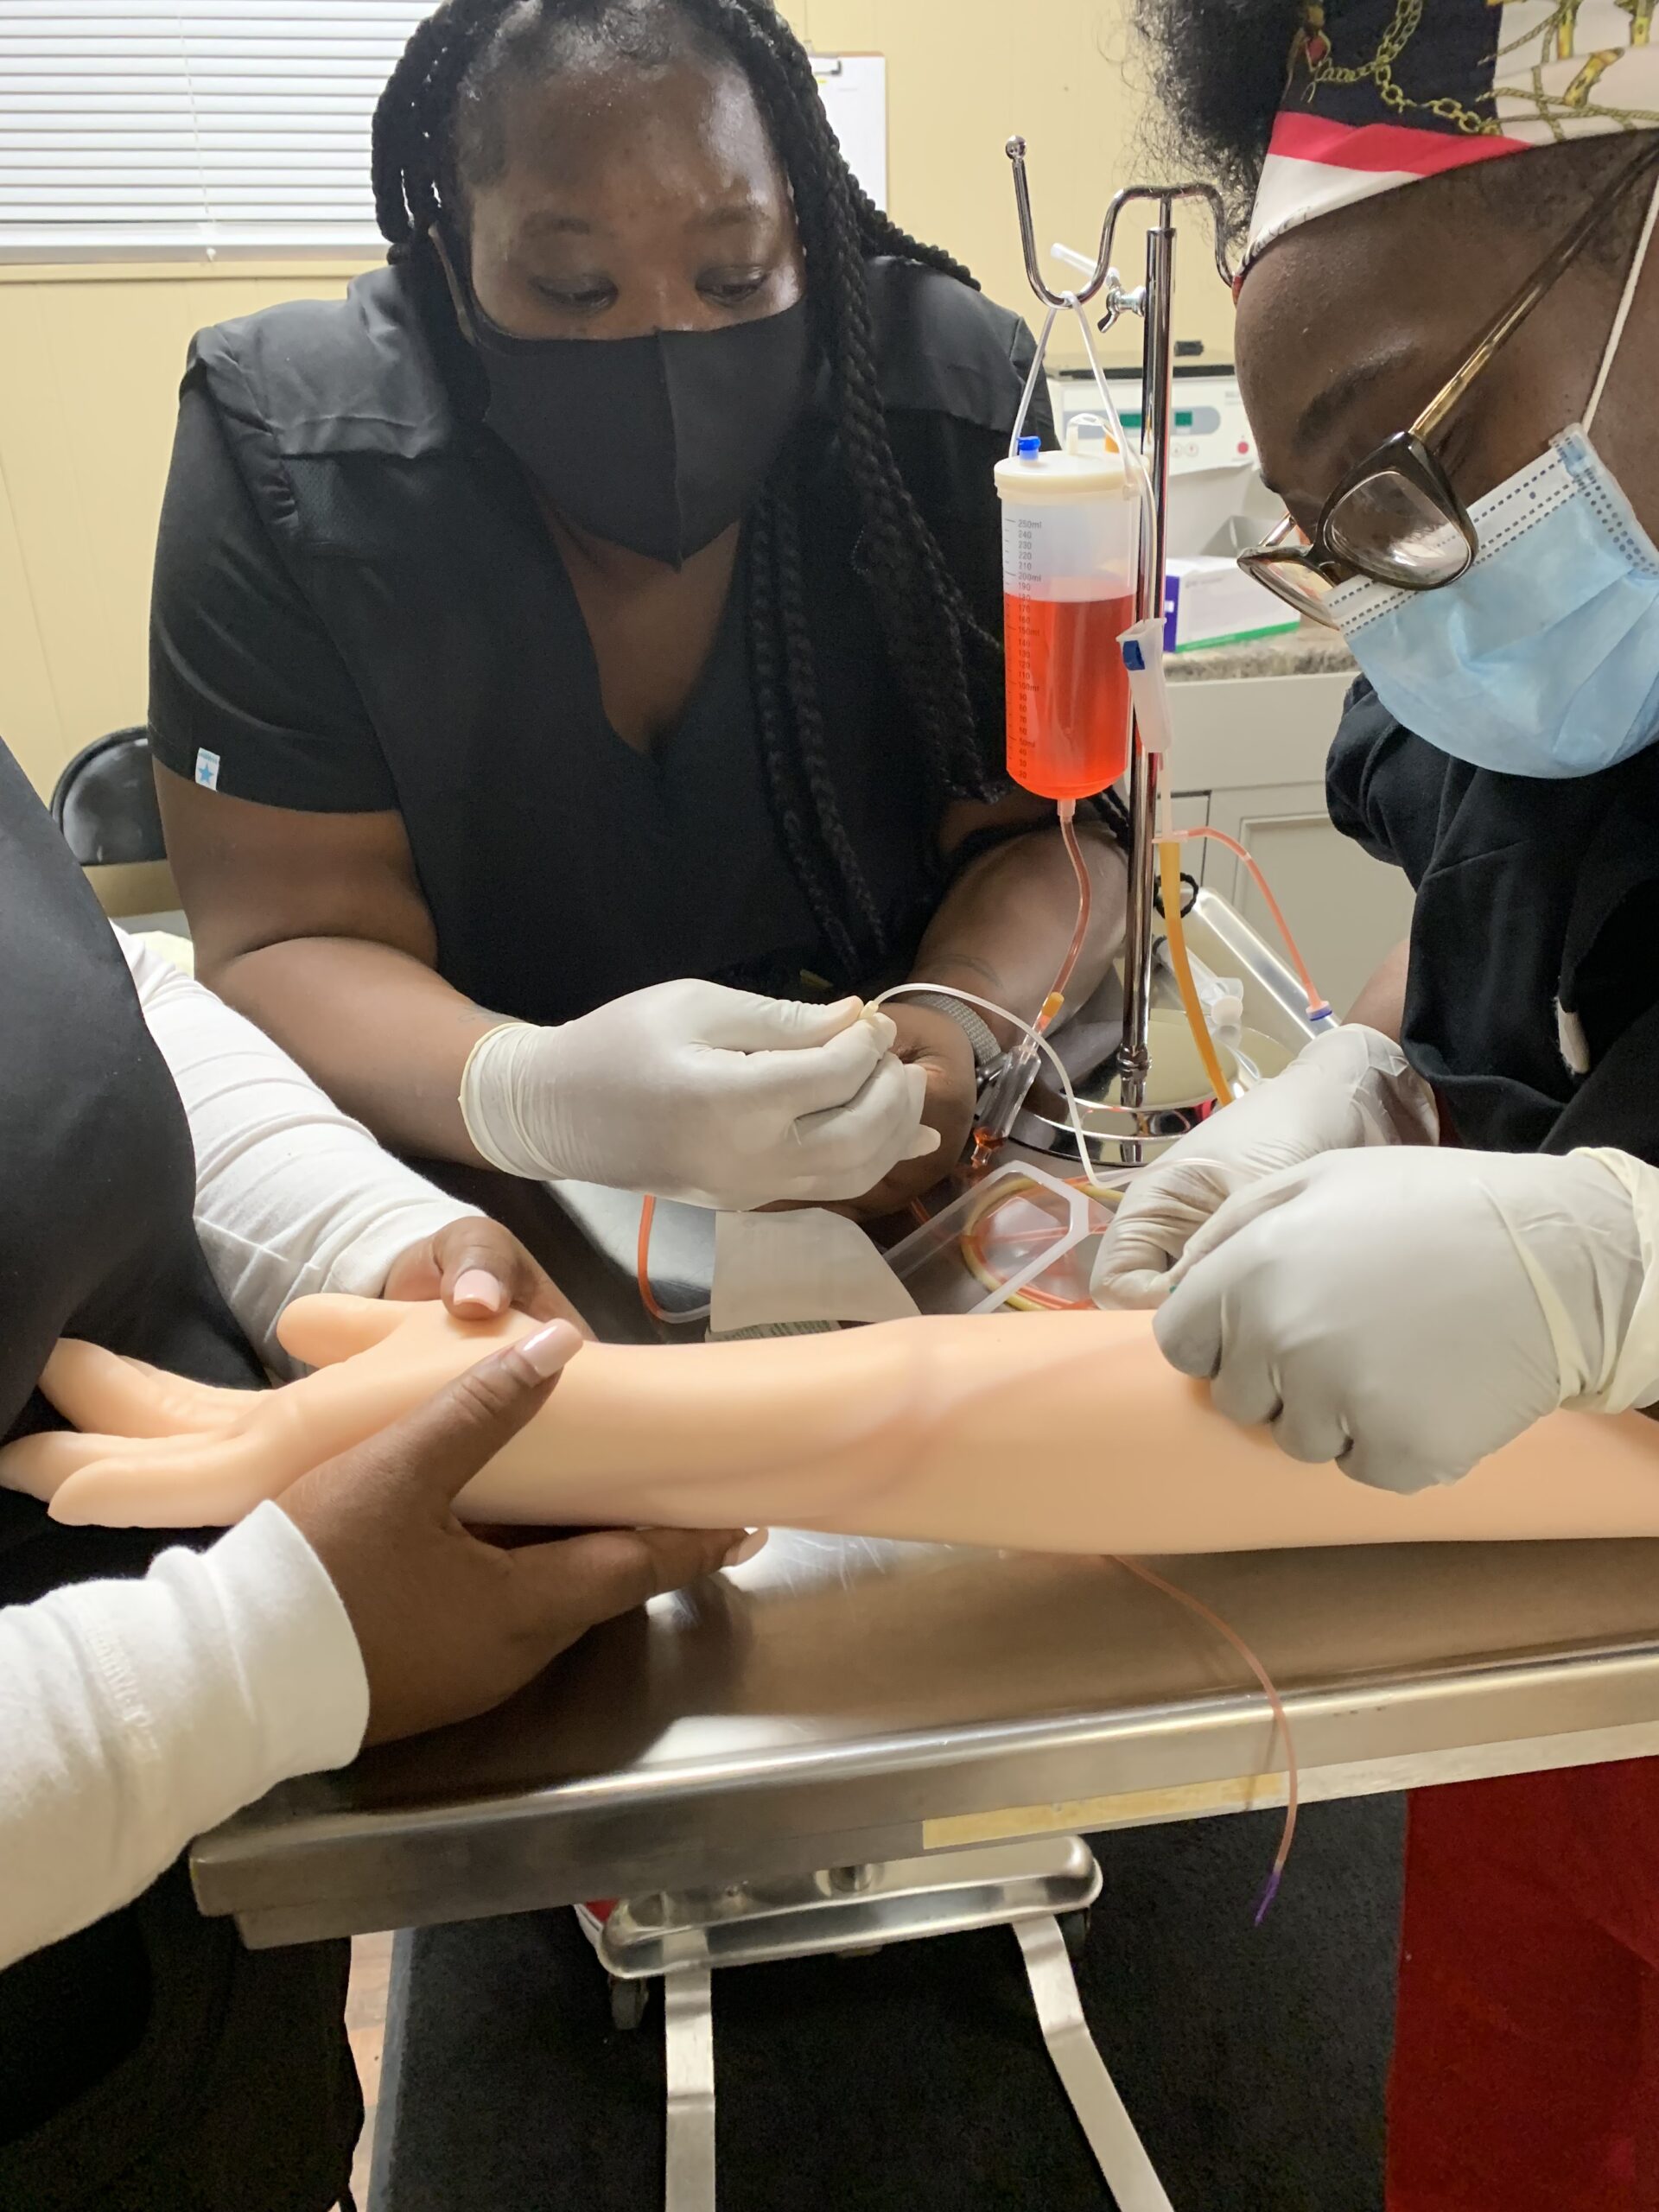 A picture of a woman practicing giving an IV.